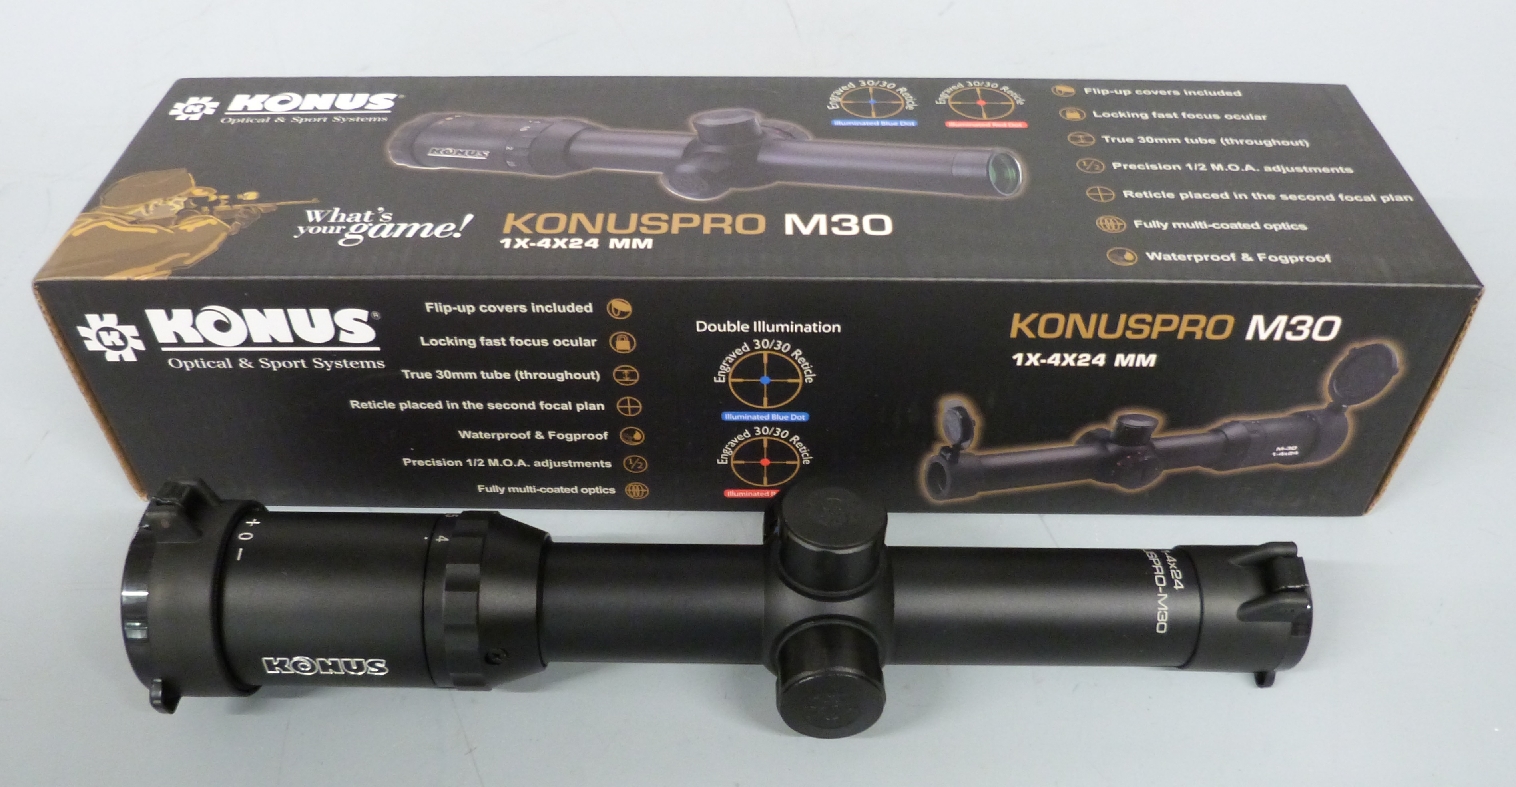 Konus Konuspro M30 1-4x24 rifle scope with illuminated red dot and flip-up covers, new in original